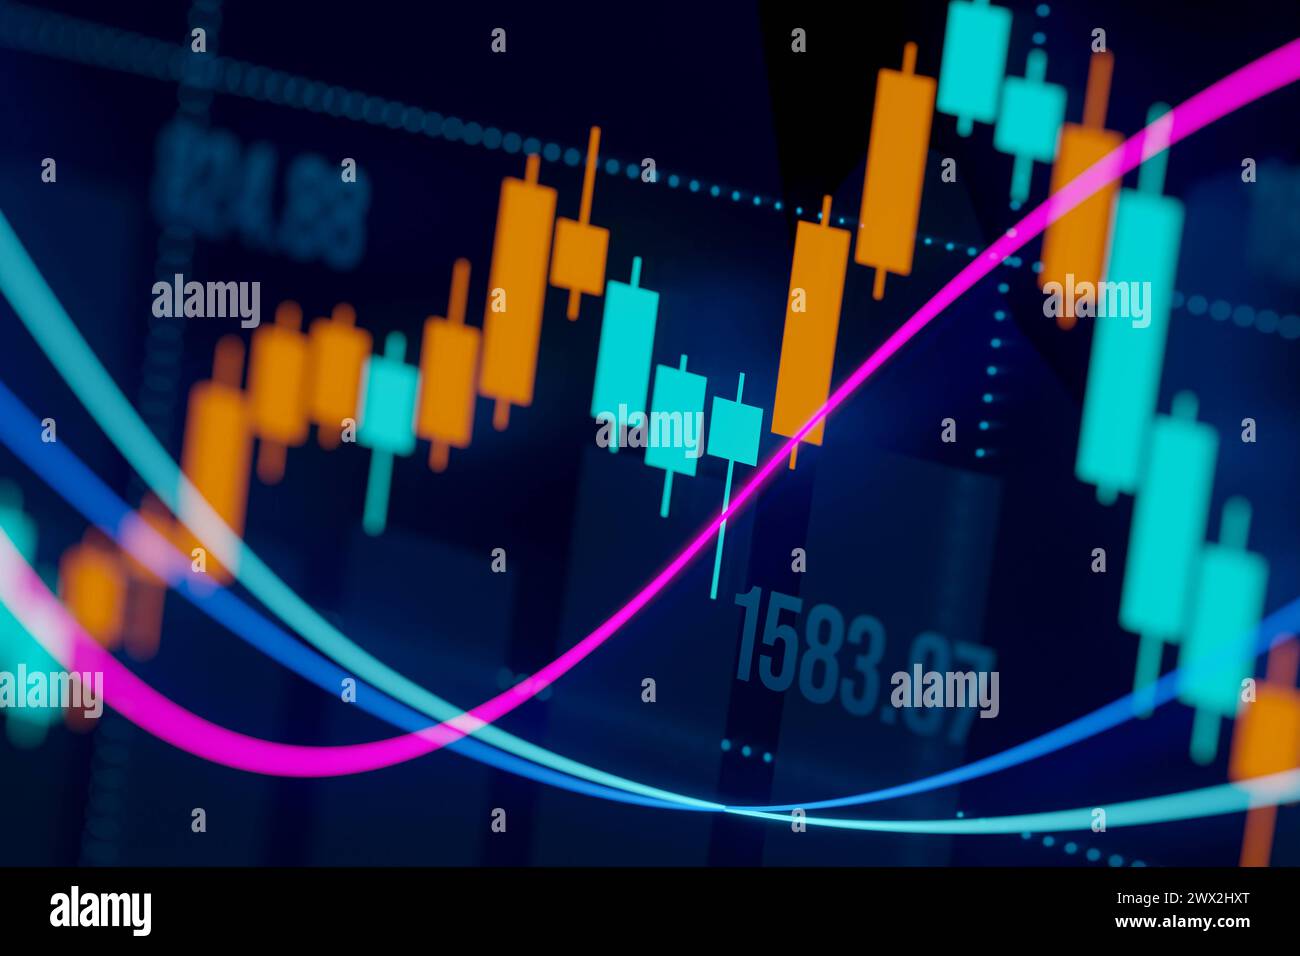 Stock market chart, lines and data. Stock market chart, lines and data. Cloes-up orange and blue candle stick chart, lines and moving averages in defo Stock Photo